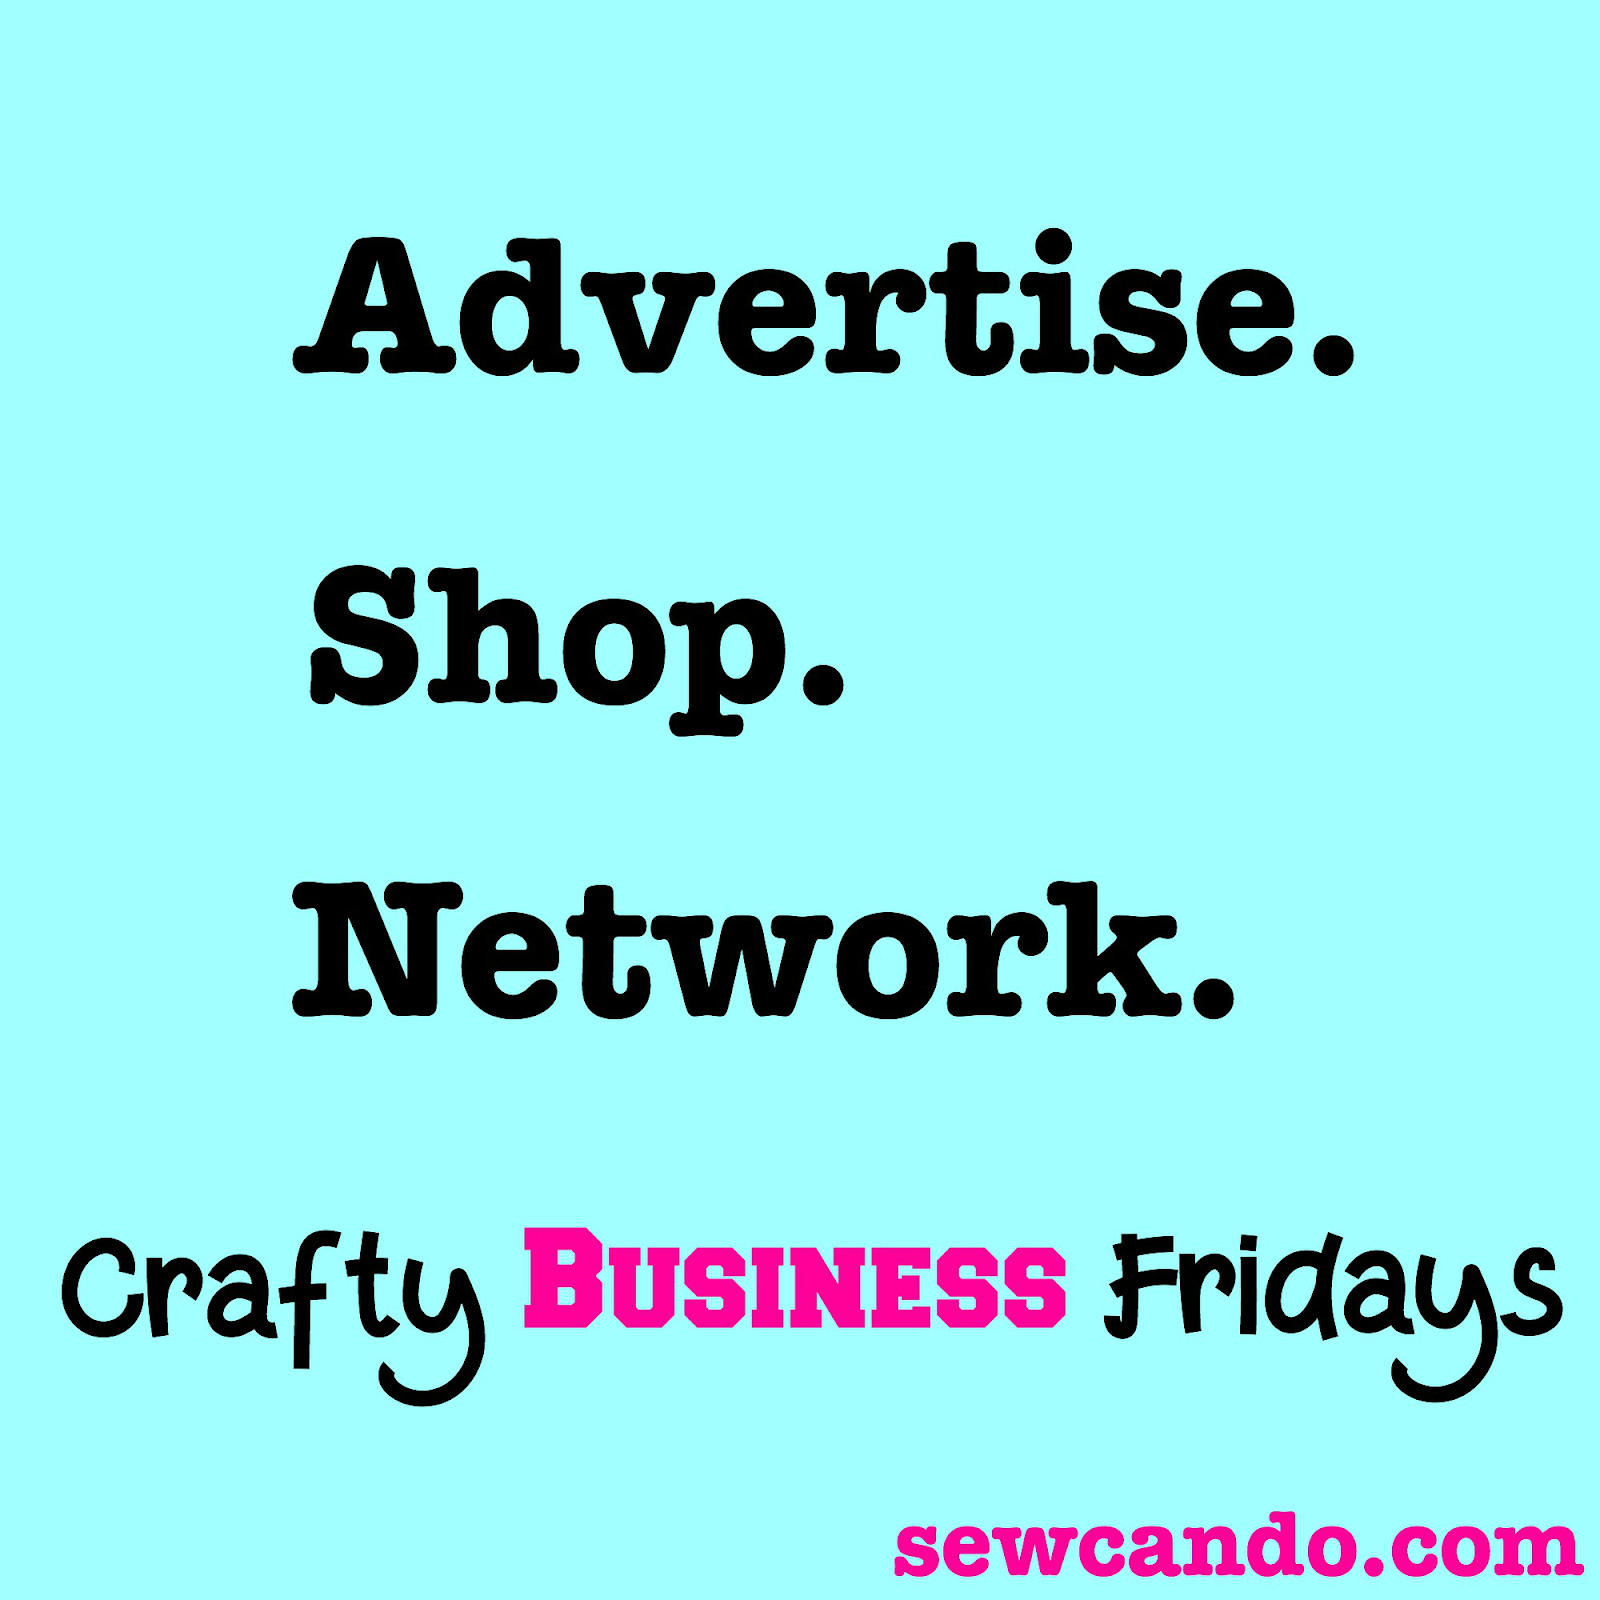 Sew Can Do: Got A Crafty or Handmade Business? You'll Want To Read This!